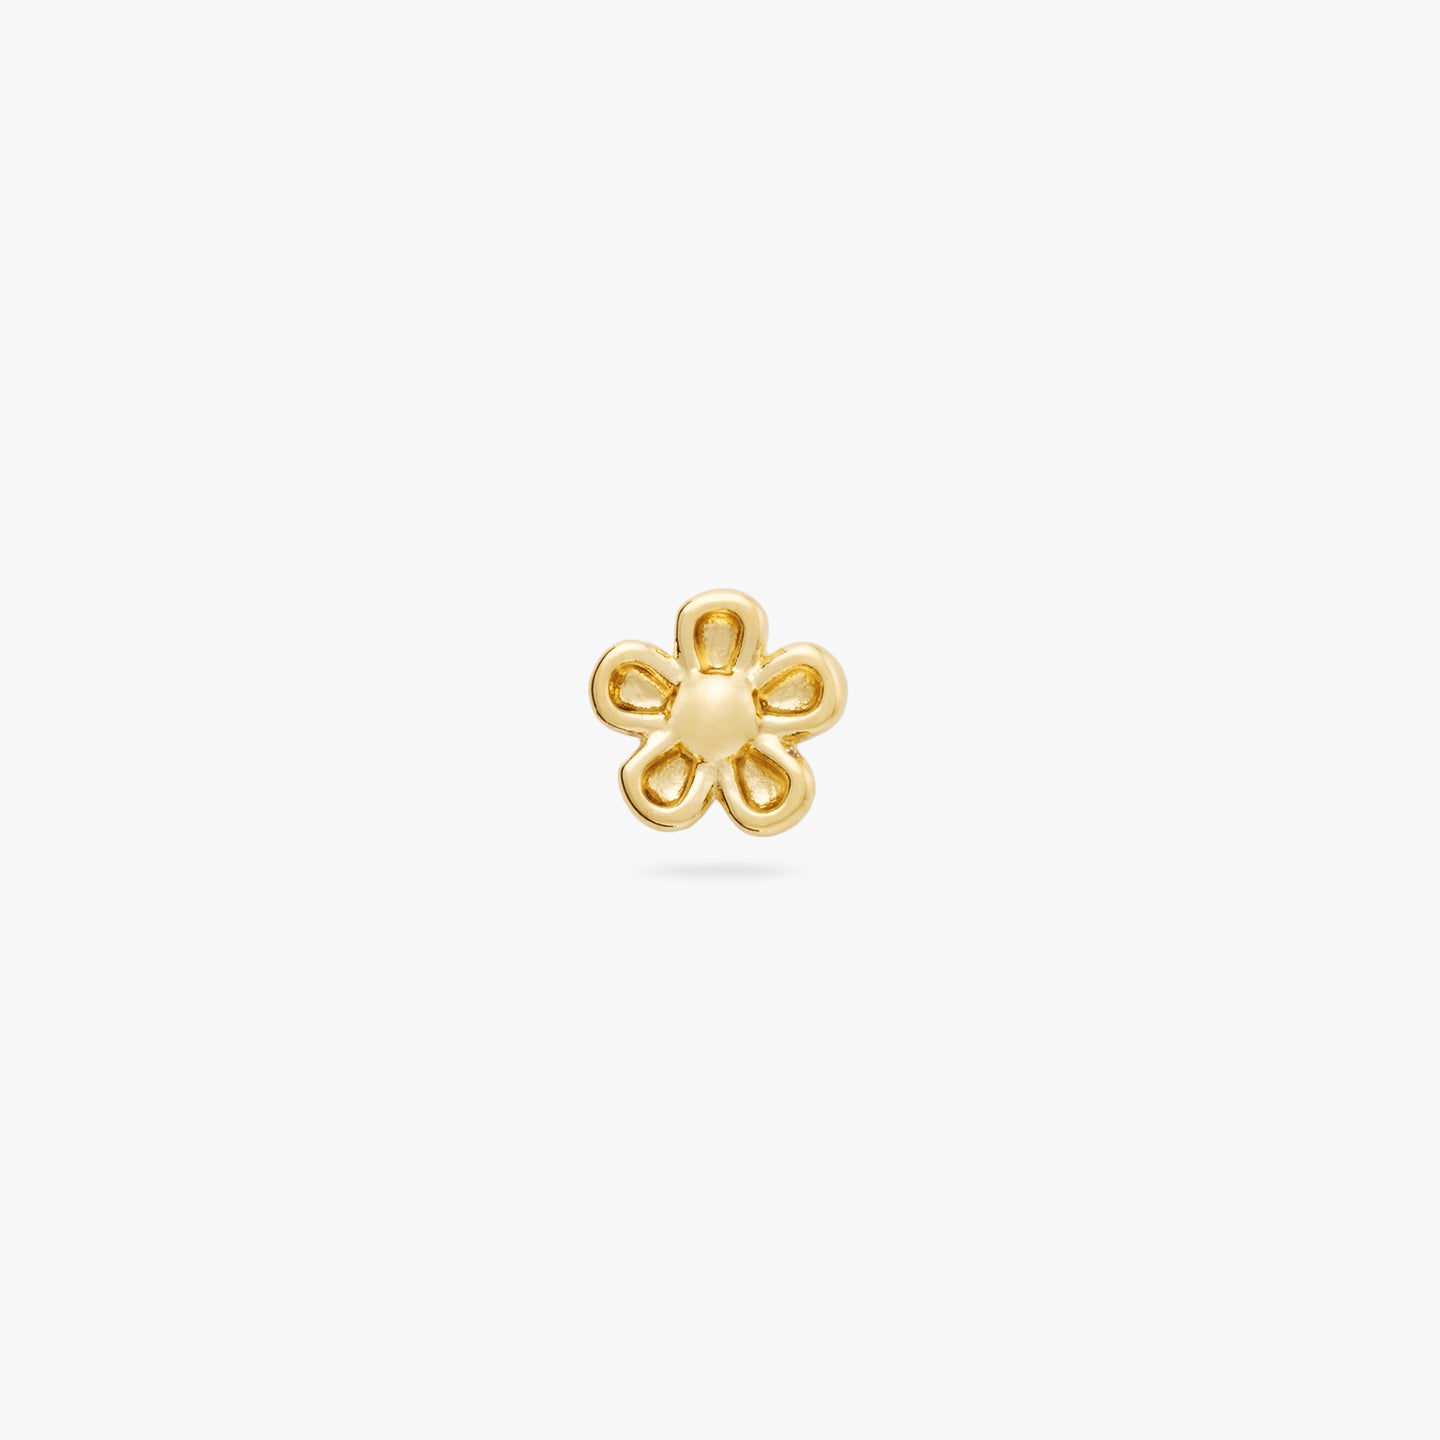 This is a small gold daisy stud color:null|gold